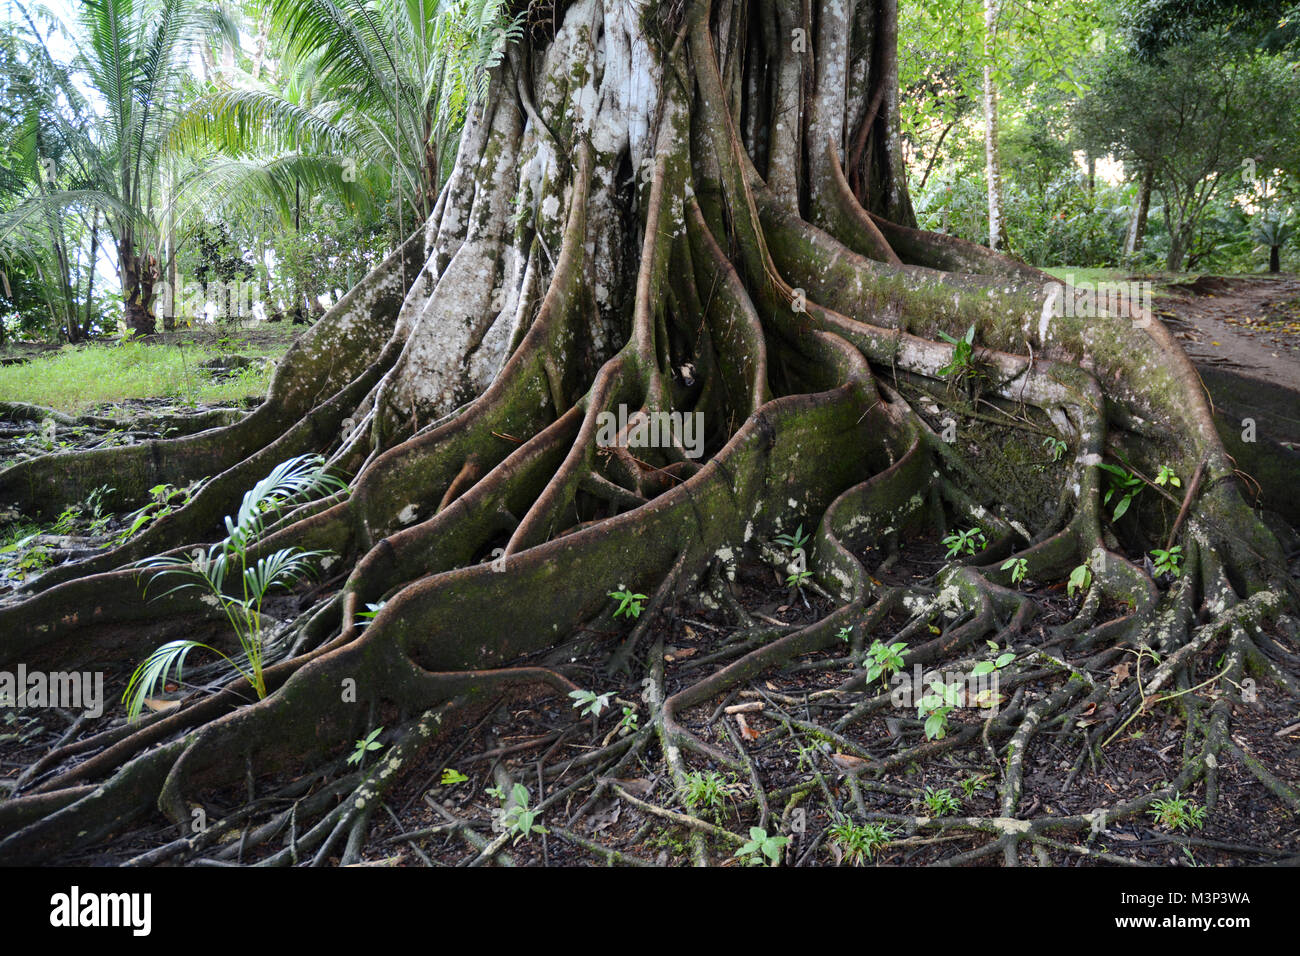 An old growth tropical rainforest tree and its roots near Bahia Drake, on the edges of Corcovado National Park, Osa Peninsula, Costa Rica. Stock Photo